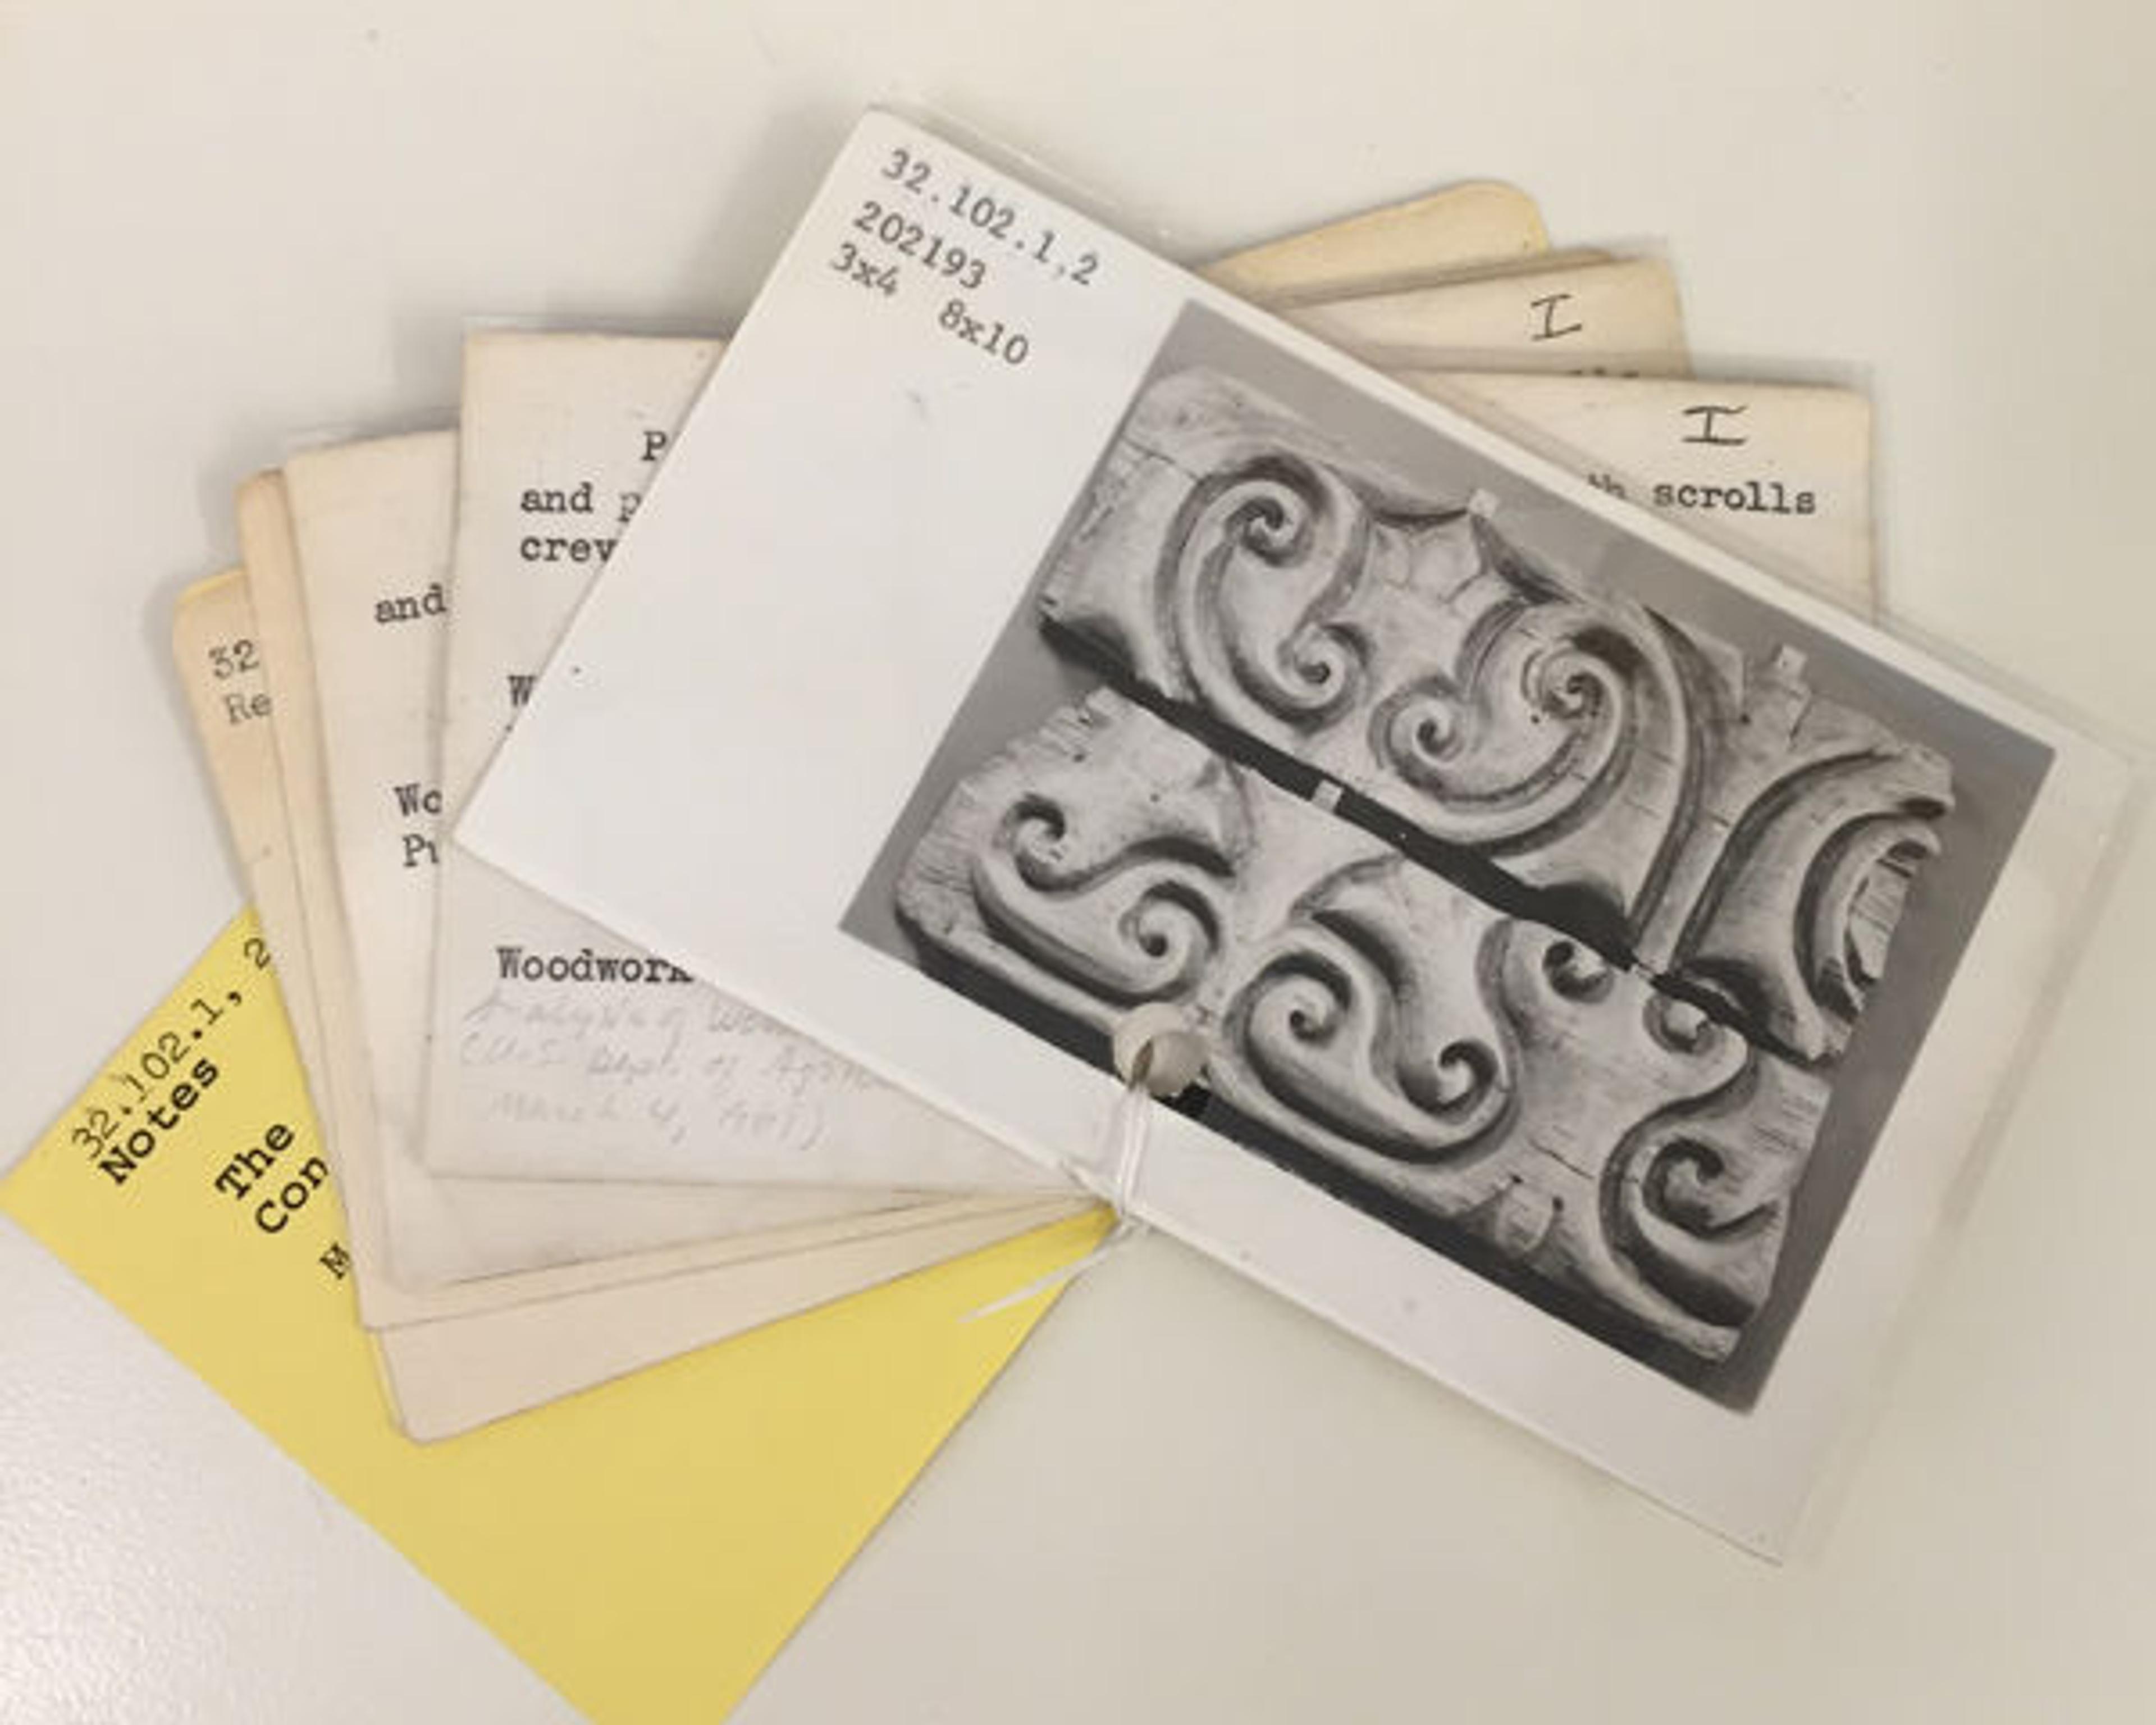 Index cards from the object card catalog with information related to 32.102.1,2